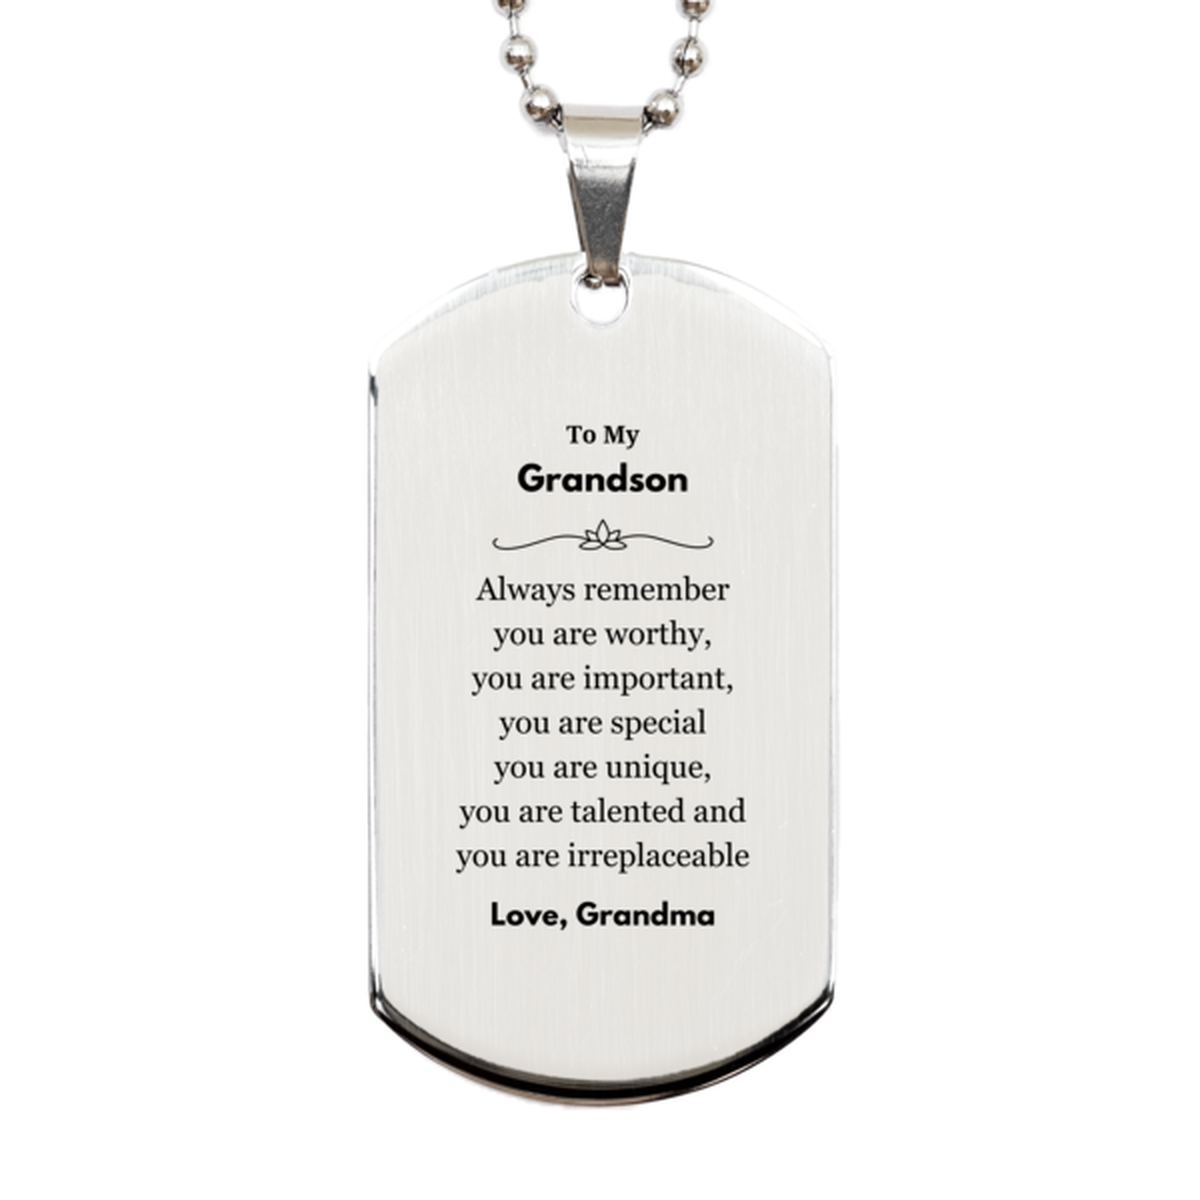 Grandson Birthday Gifts from Grandma, Inspirational Silver Dog Tag for Grandson Christmas Graduation Gifts for Grandson Always remember you are worthy, you are important. Love, Grandma